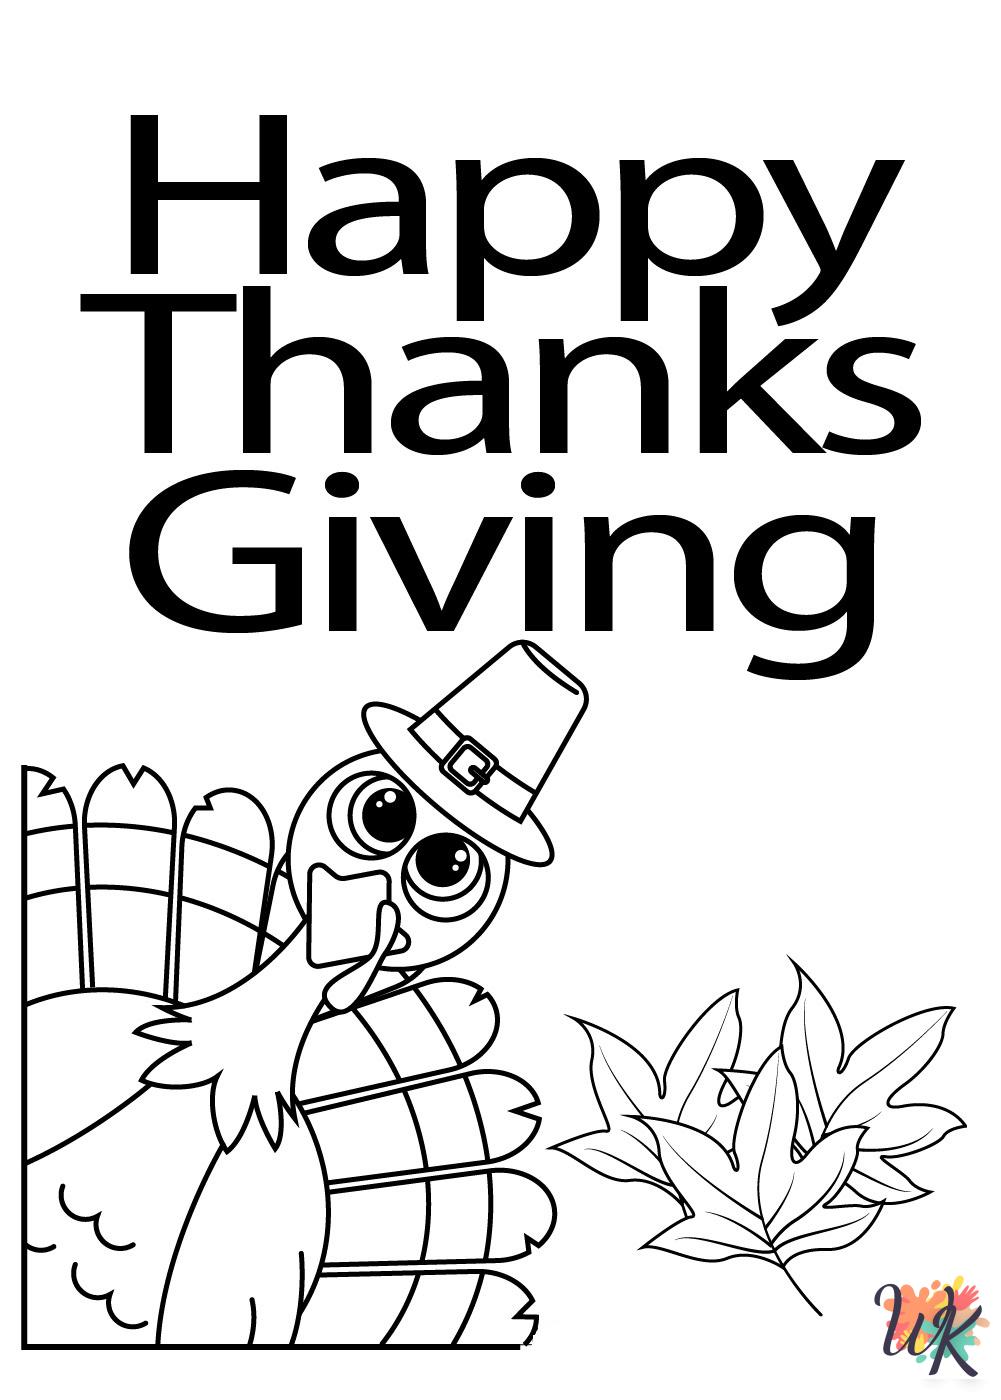 free printable Thanksgiving coloring pages for adults